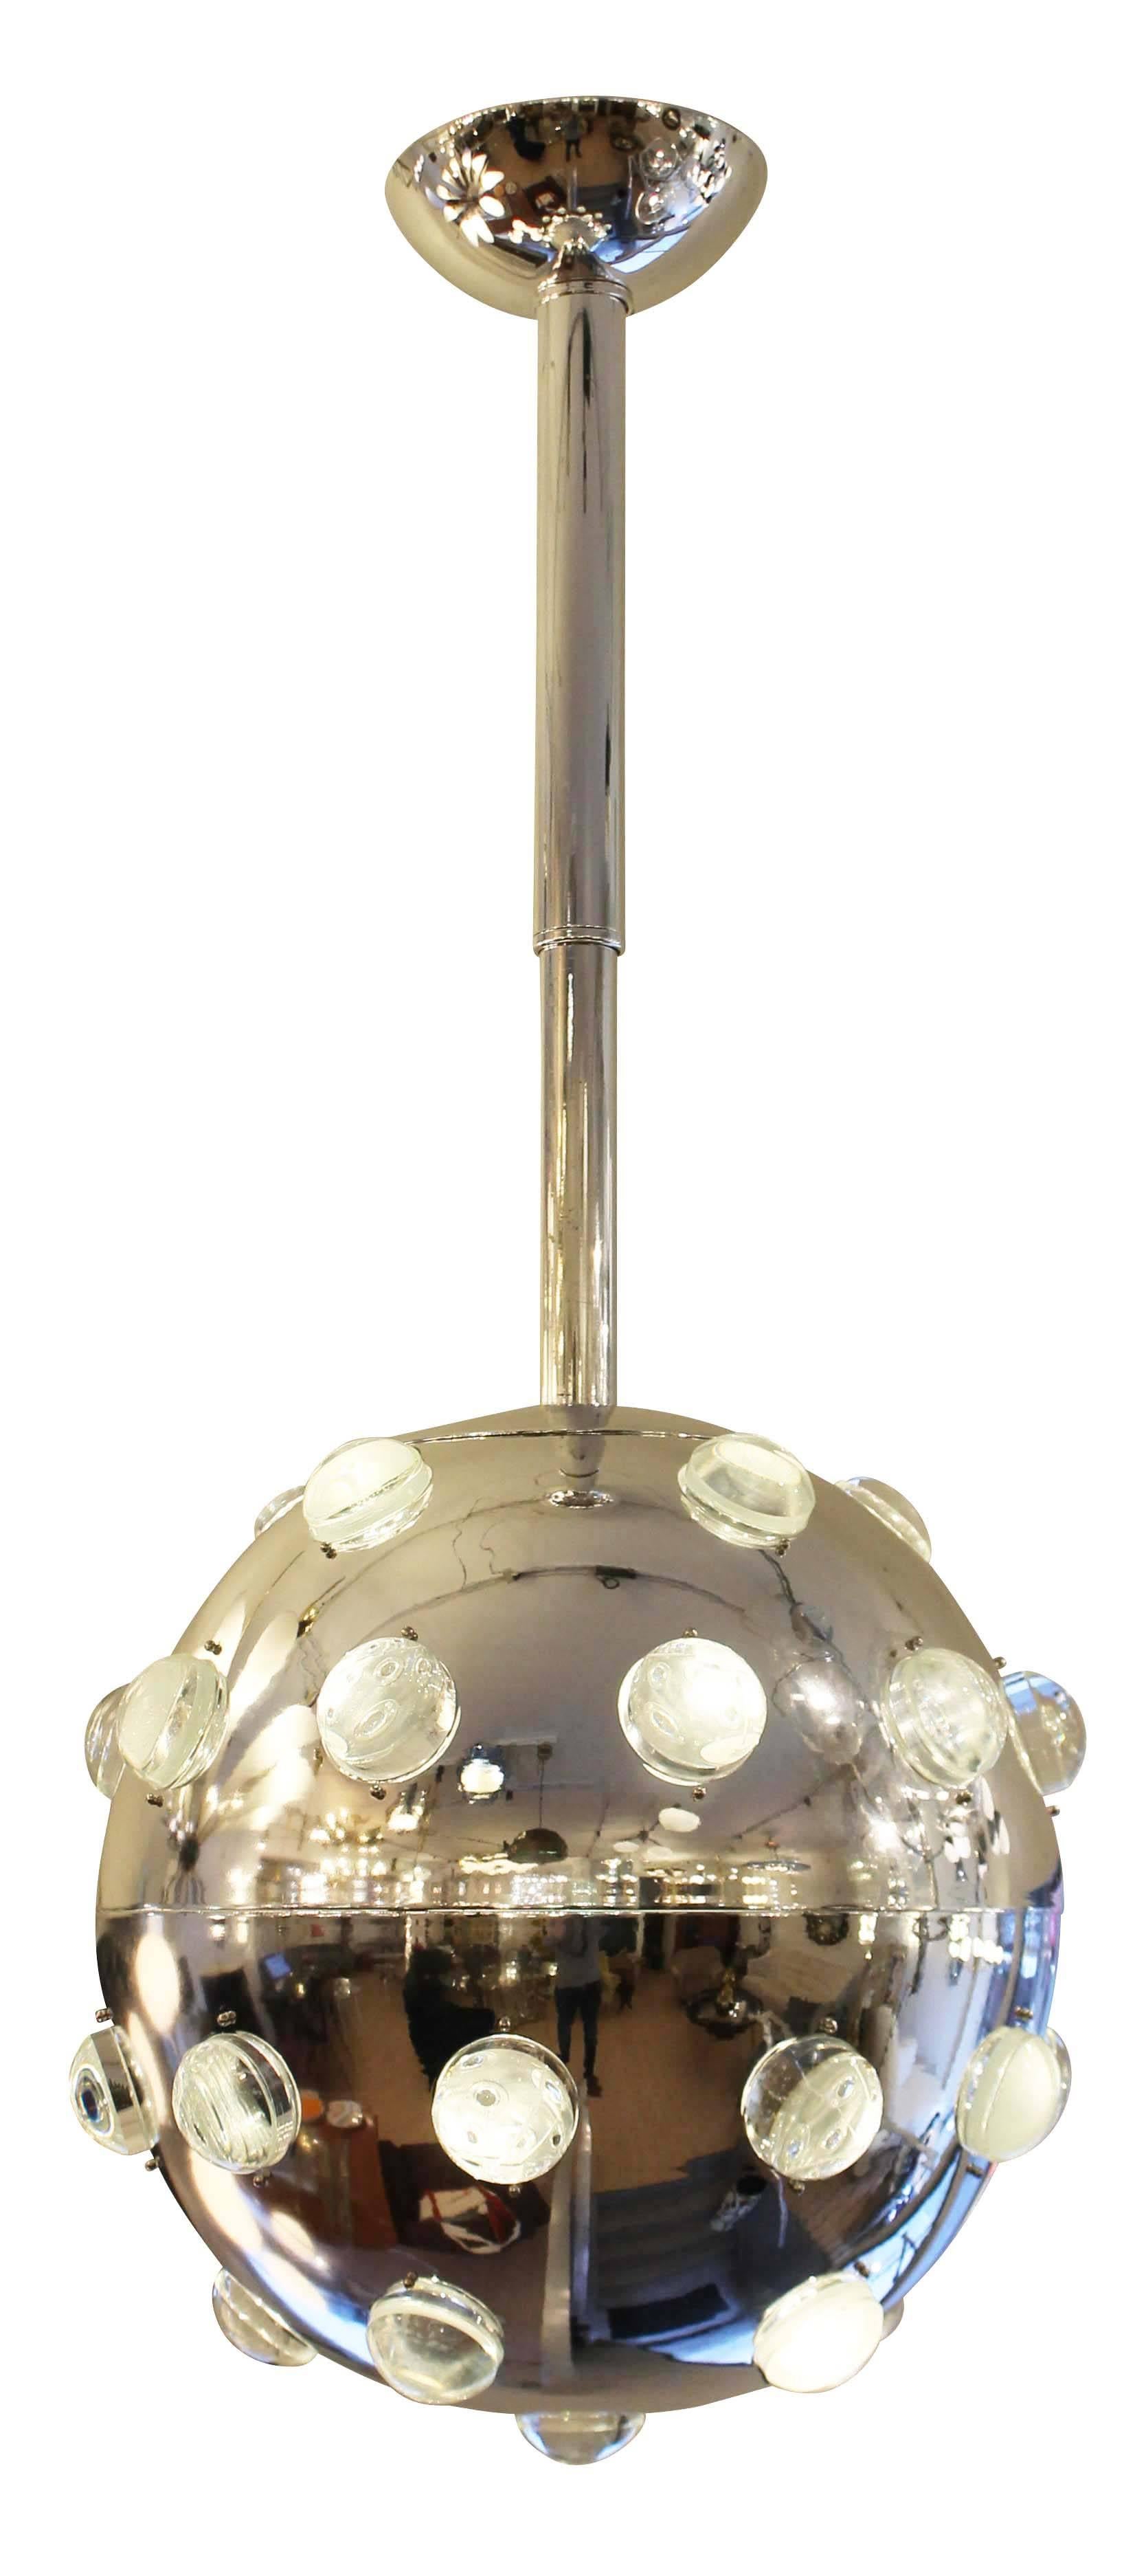 Impactful chrome pendant covered by glass studs through which light is diffused. Hangs on a telescopic stem which can be extended 14 in. for a total possible height of 63 in. Possibly manufactured by Leucos. Holds ten regular sockets.
